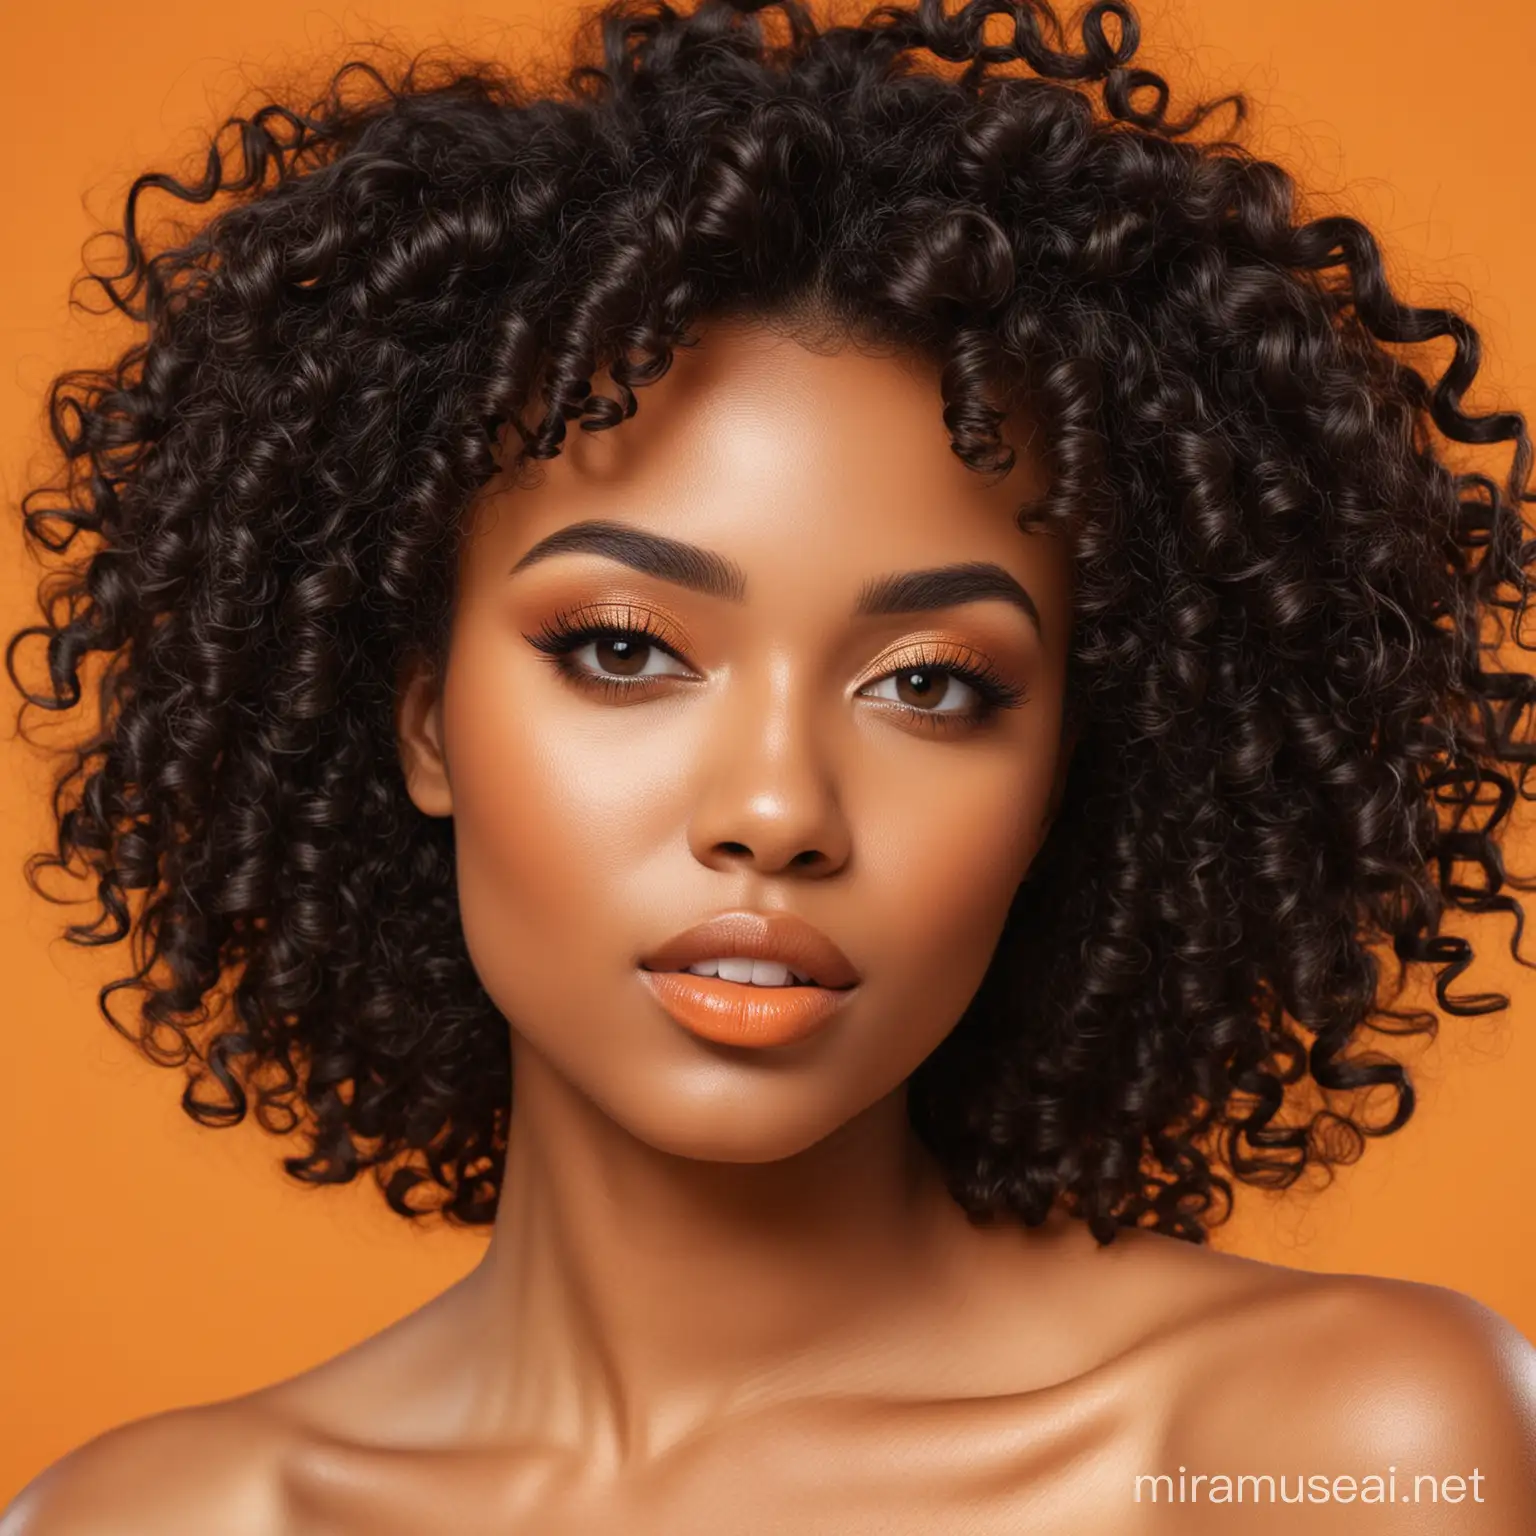 Sultry DarkSkinned Woman with Vibrant Curls Against an Orange Backdrop